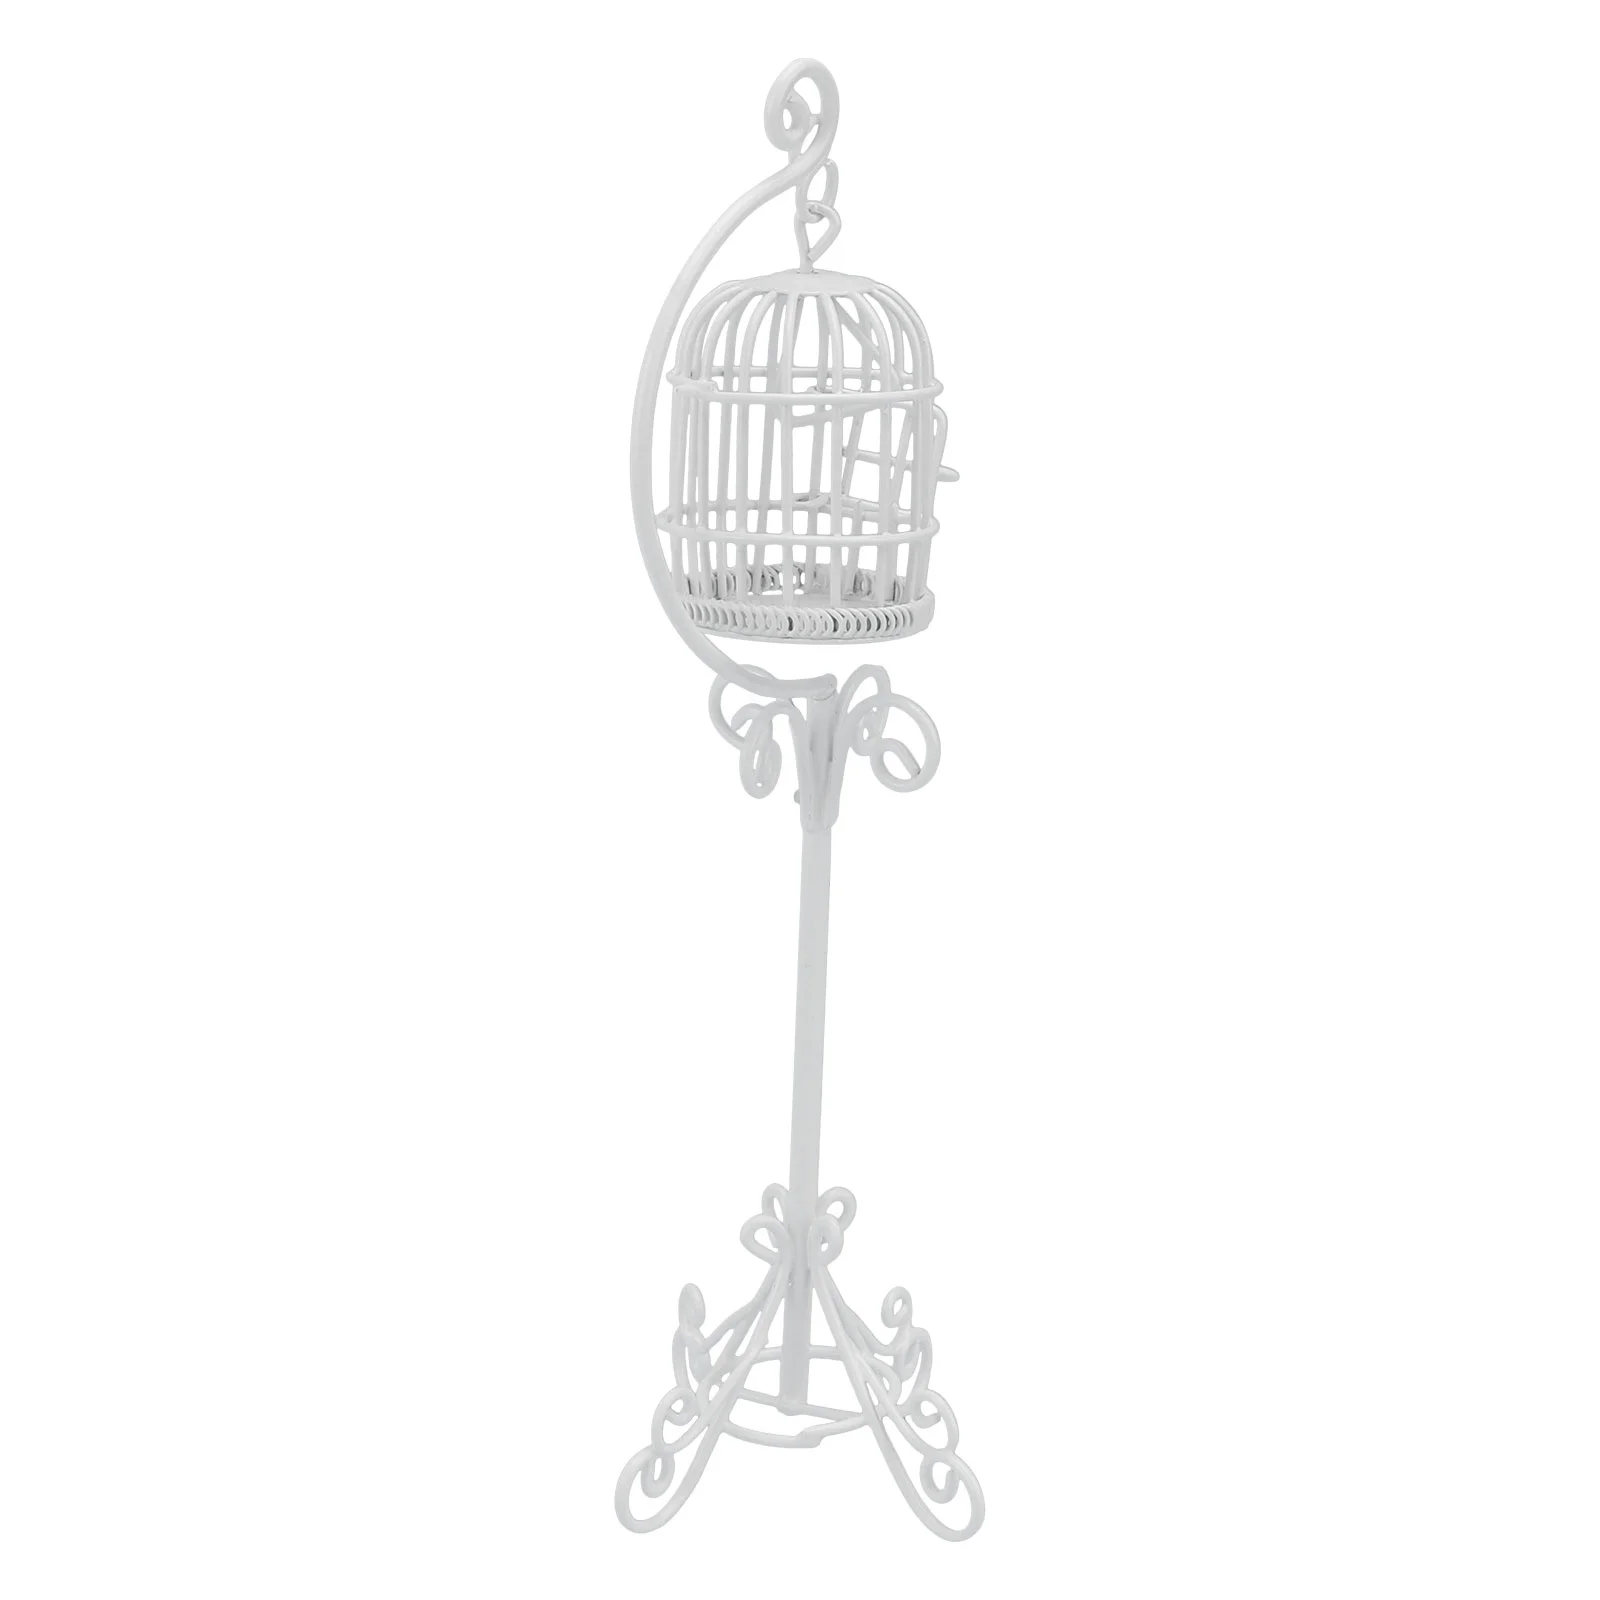 

Home Decoration Miniature Metal Birdcage Support House Outdoor Bracket Decorations Balcony Adornment Model White Craft